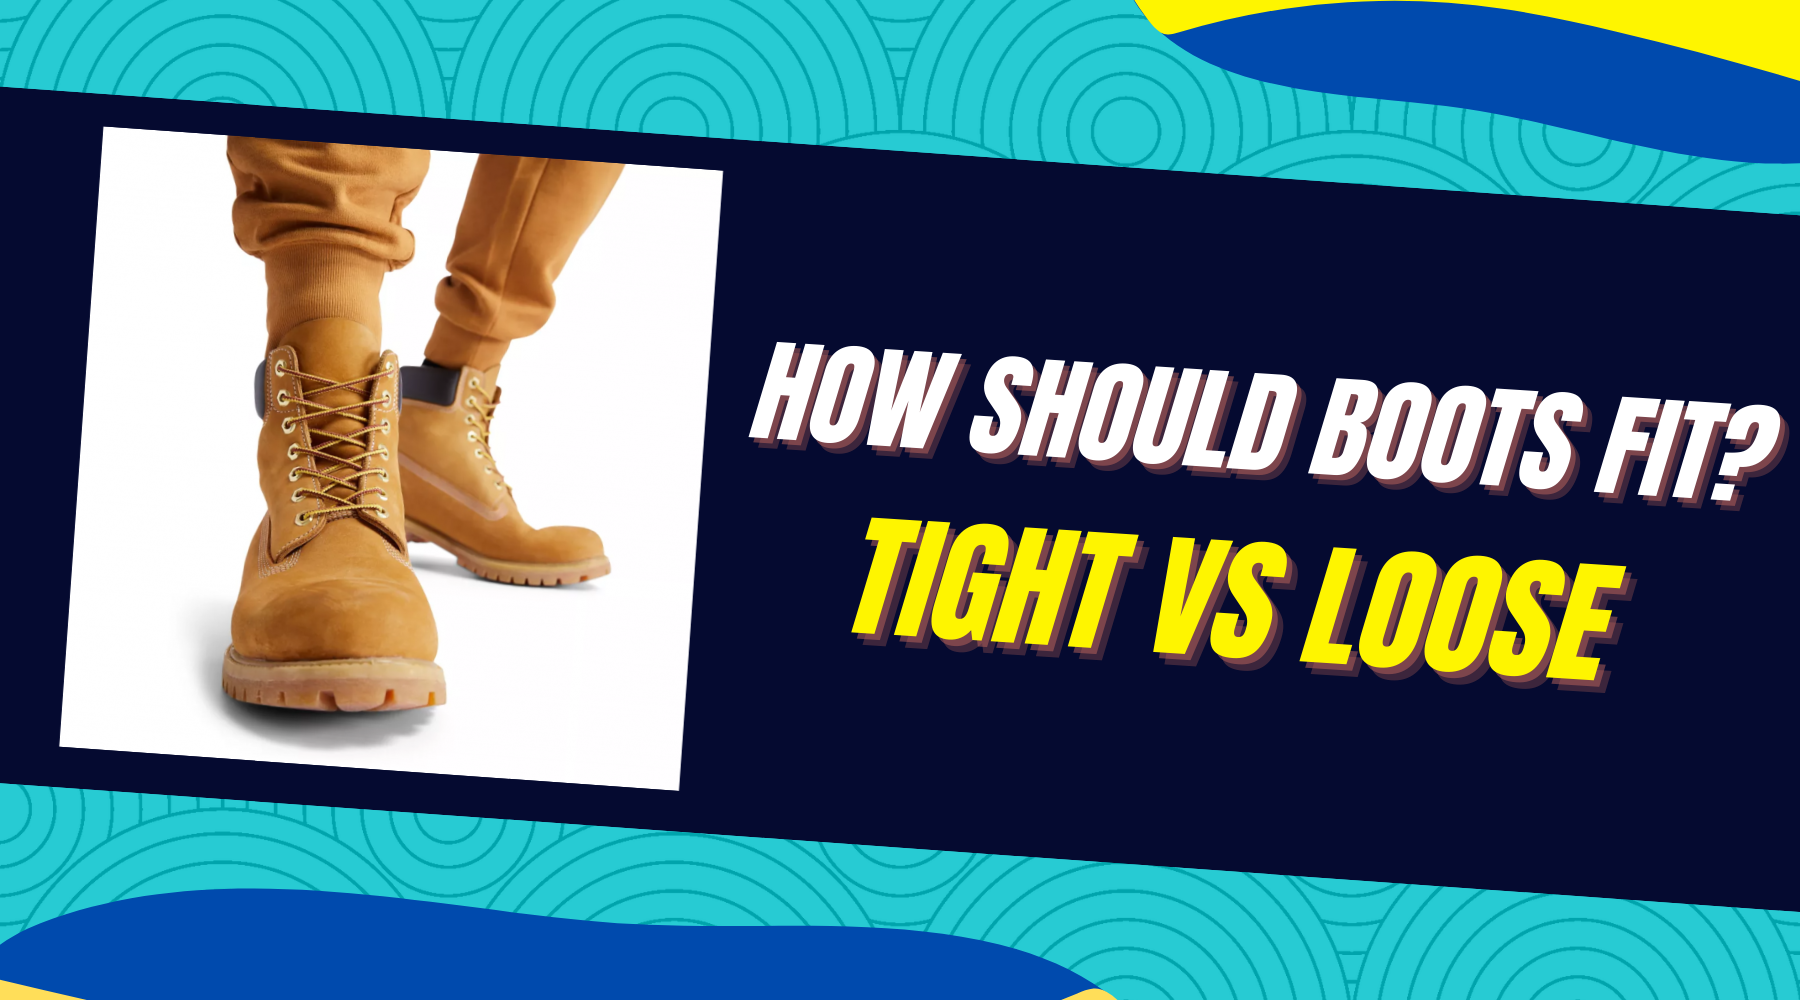 How should boots fit Tight vs Loose